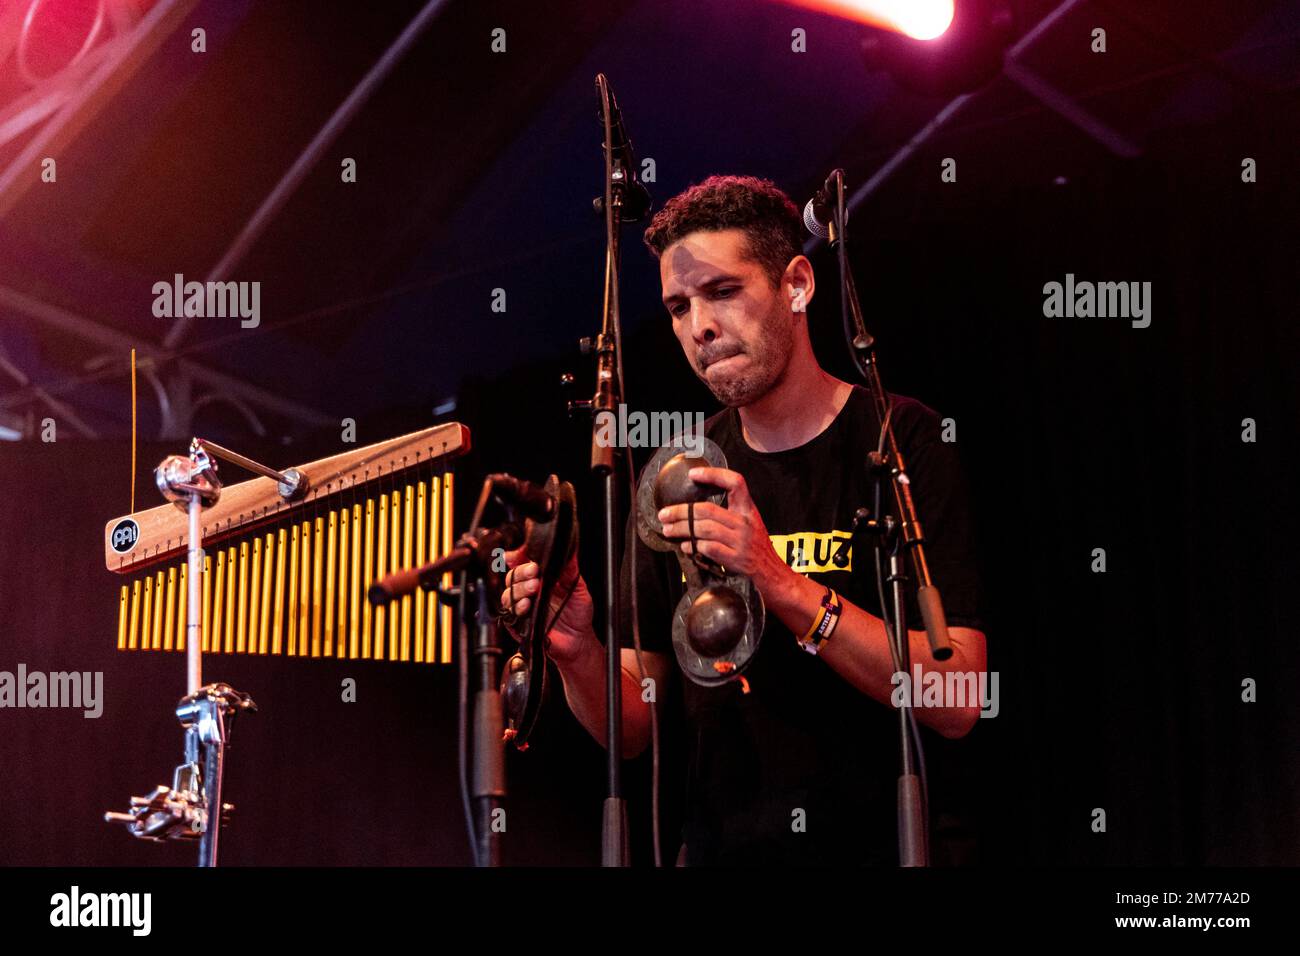 L gig hi-res stock photography and images - Alamy